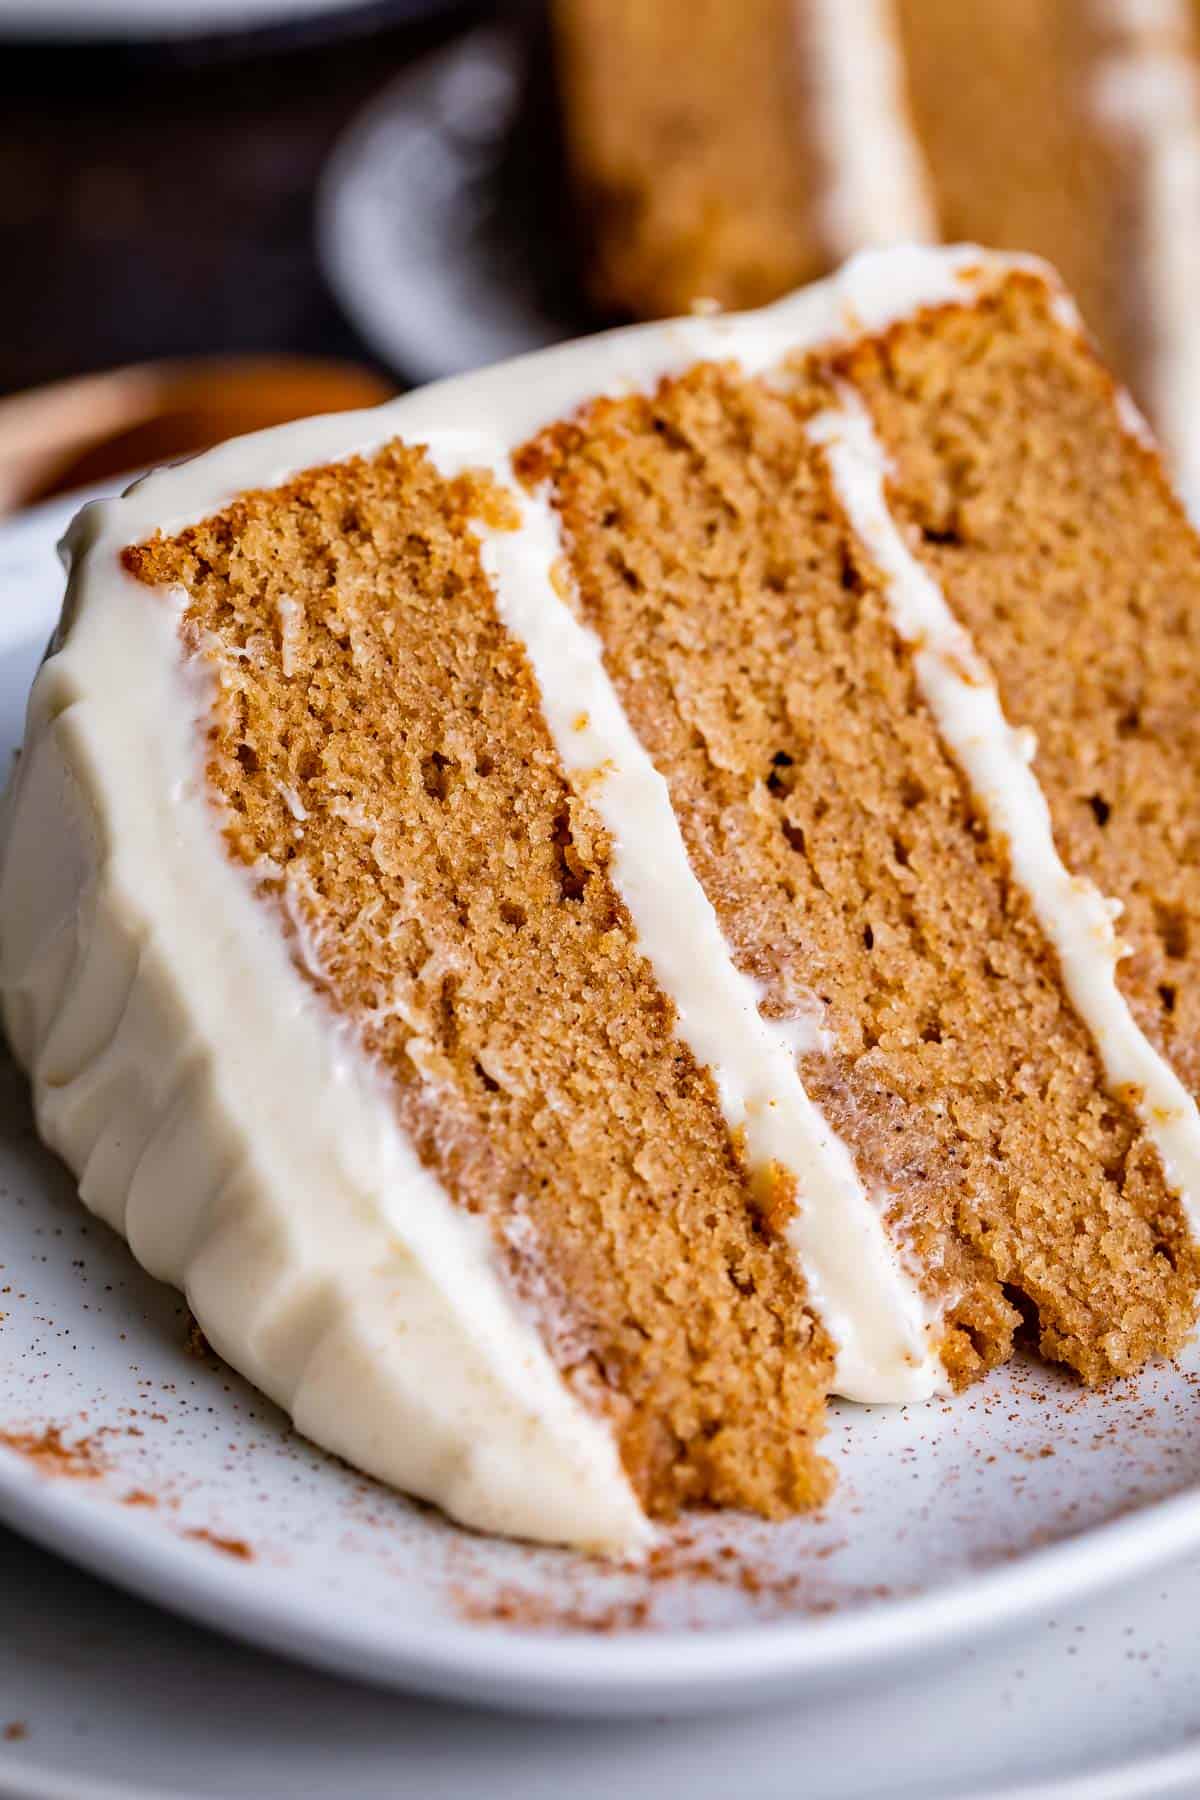 https://thefoodcharlatan.com/wp-content/uploads/2020/10/Spice-Cake-with-Cream-Cheese-Frosting-6-1.jpg